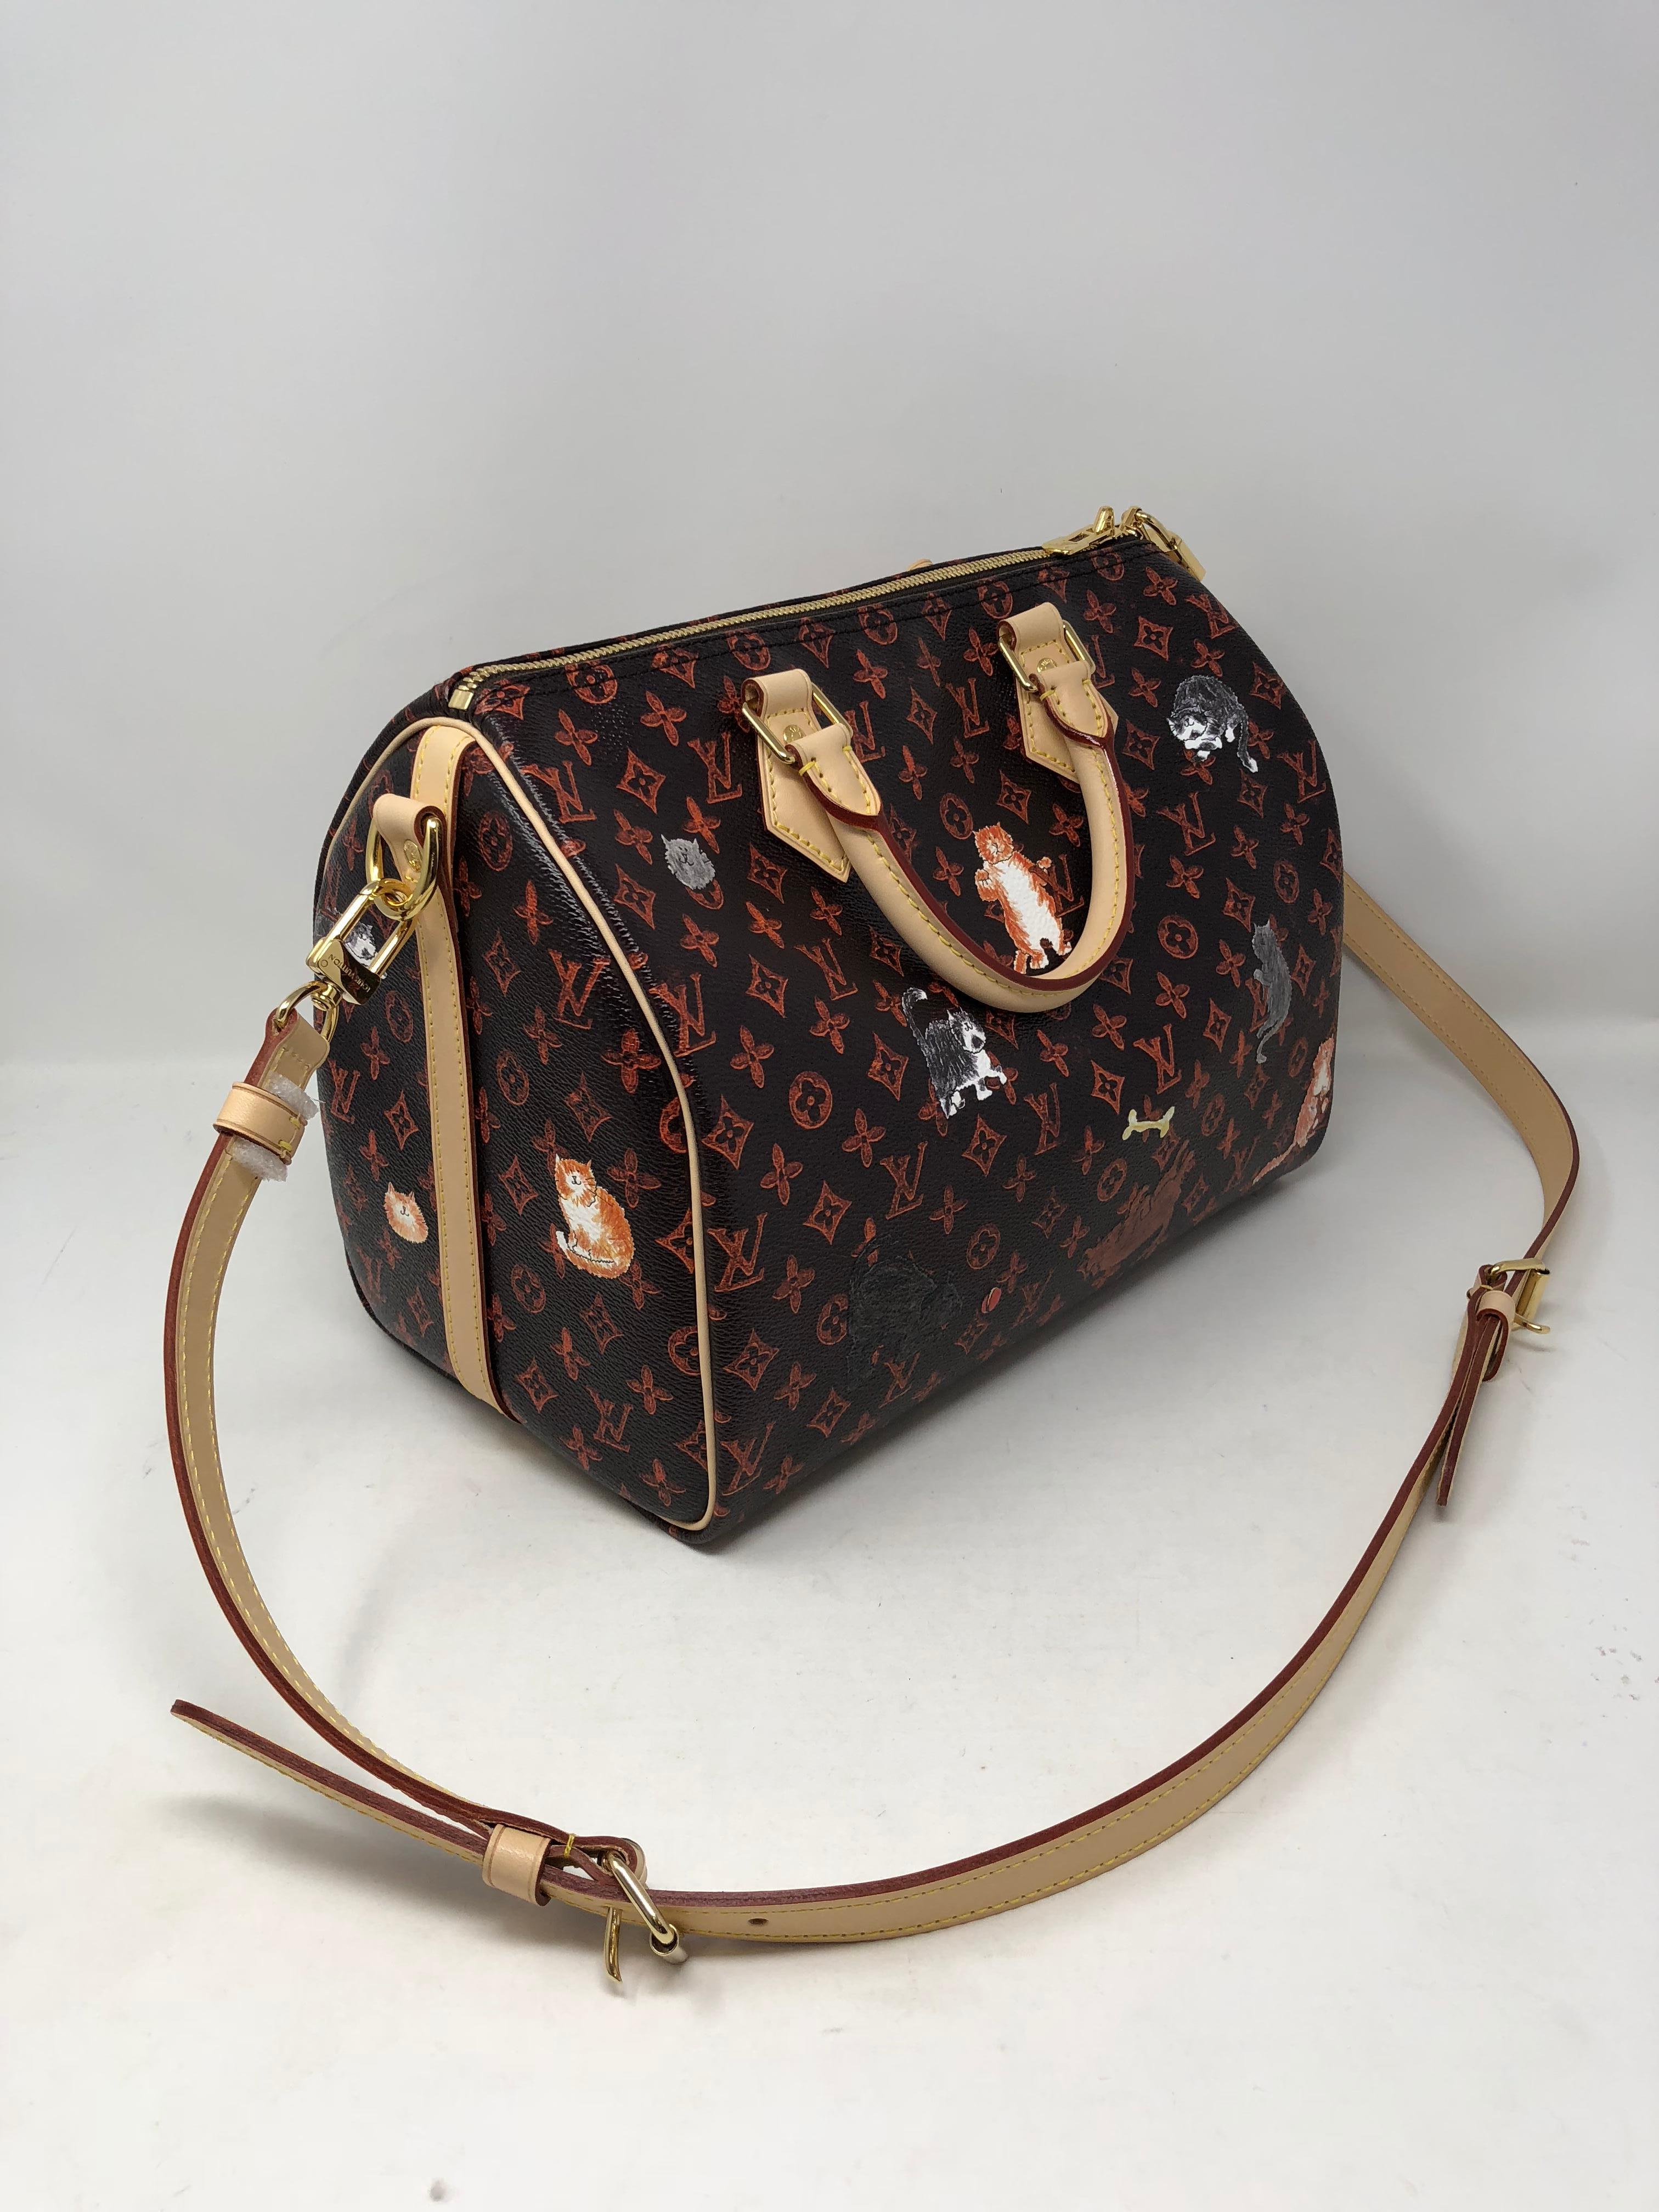 Louis Vuitton Catogram Speedy 30 Bandouliere. Designed by famous fashion editor Grace Coddington with her love for animals. The Catogram is the Must have for any LV collector and lover of cats and dogs. Or as an art piece. This soon to be classic